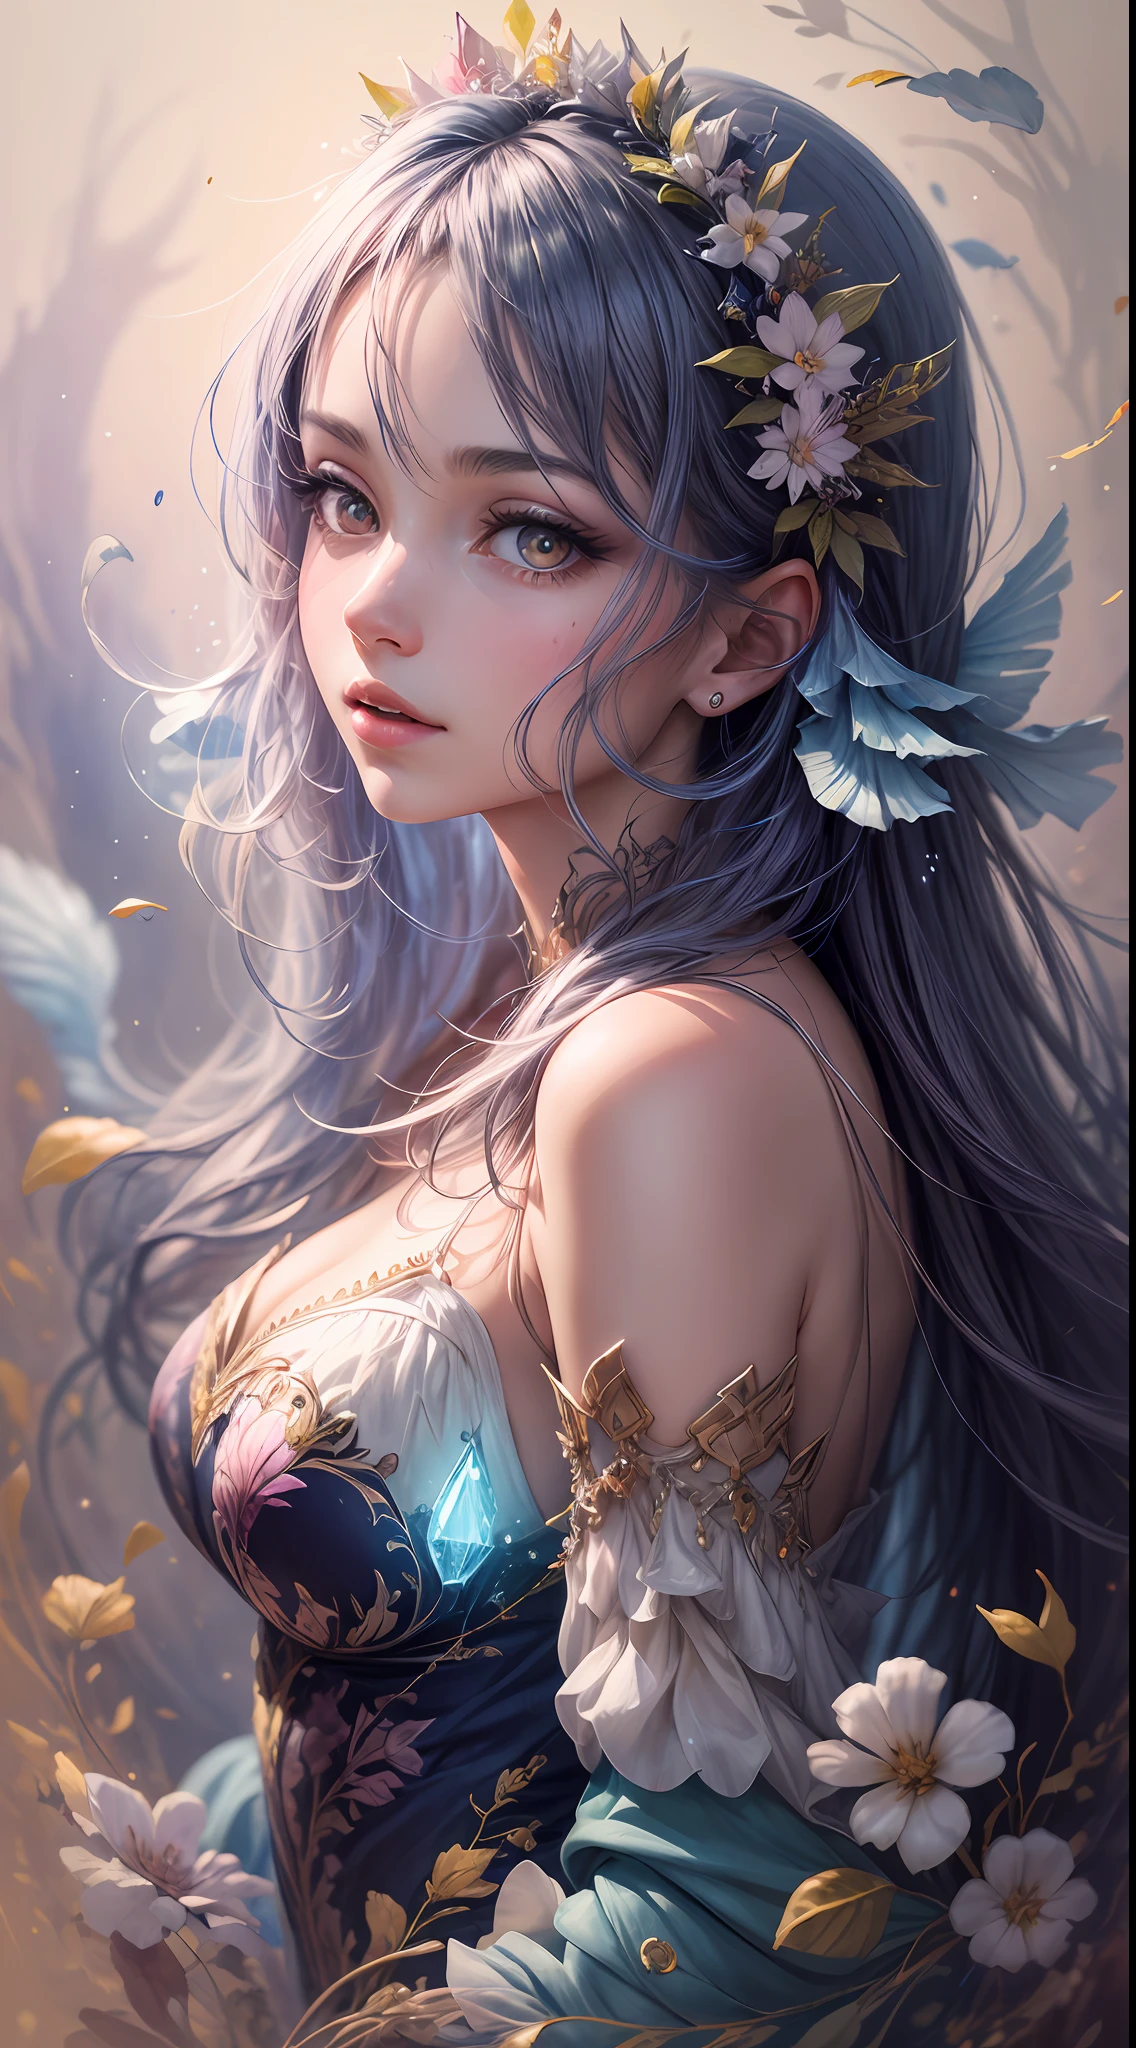 A captivating anime girl gracefully emerges from the pages of a watercolor painting, her vibrant and intricate colors breathing life into the artwork. She dons an extraordinary fantasy costume adorned with delicate details, reflecting the enchanting world she inhabits. Luminescent elements, like glowing crystals and ethereal wisps, surround her, casting a soft, otherworldly glow. The watercolor style imbues the image with a sense of fluidity and delicacy, as if the colors are effortlessly blending and bleeding into one another. Camera shot: medium shot, Camera lens: soft focus, Lighting: luminescent glow, watercolor brushstrokes,